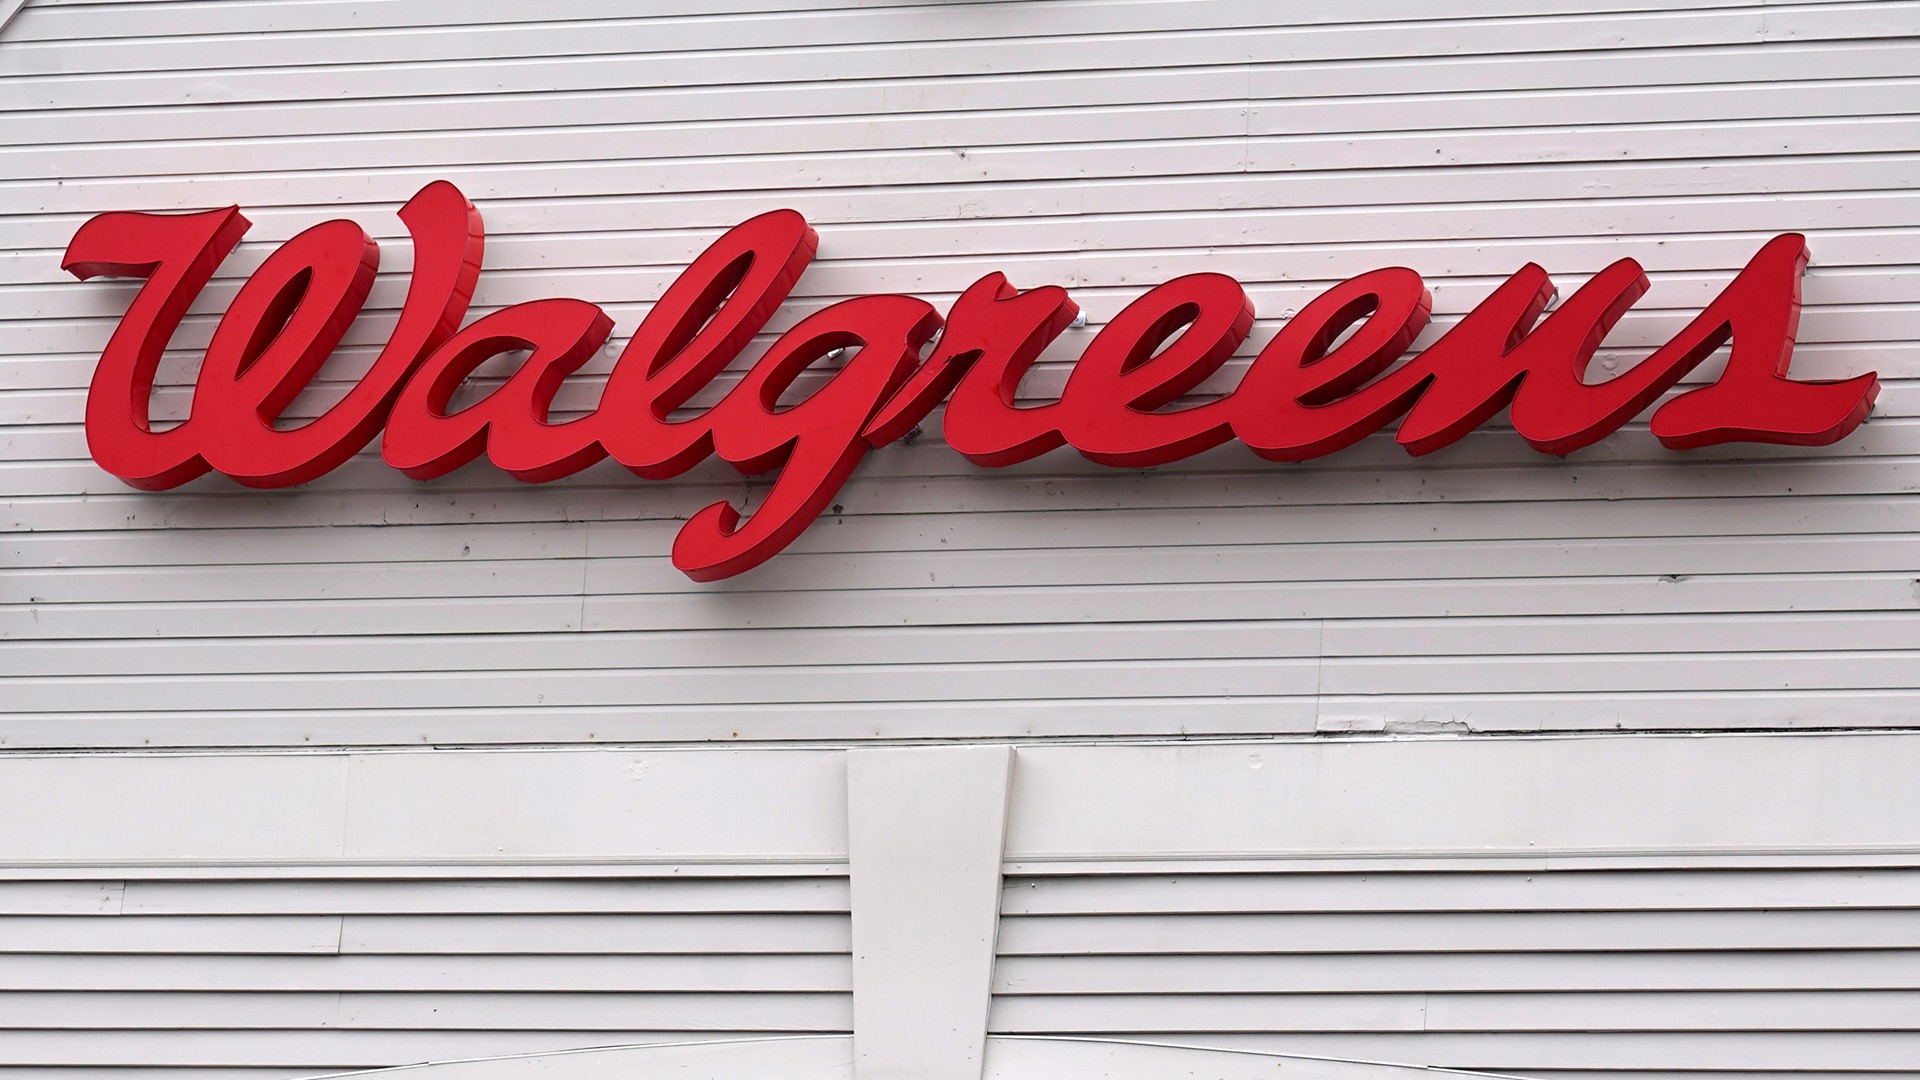 While Walgreens is not currently dispensing the abortion pills in any states, it's working to become eligible through an FDA-mandated certification process.